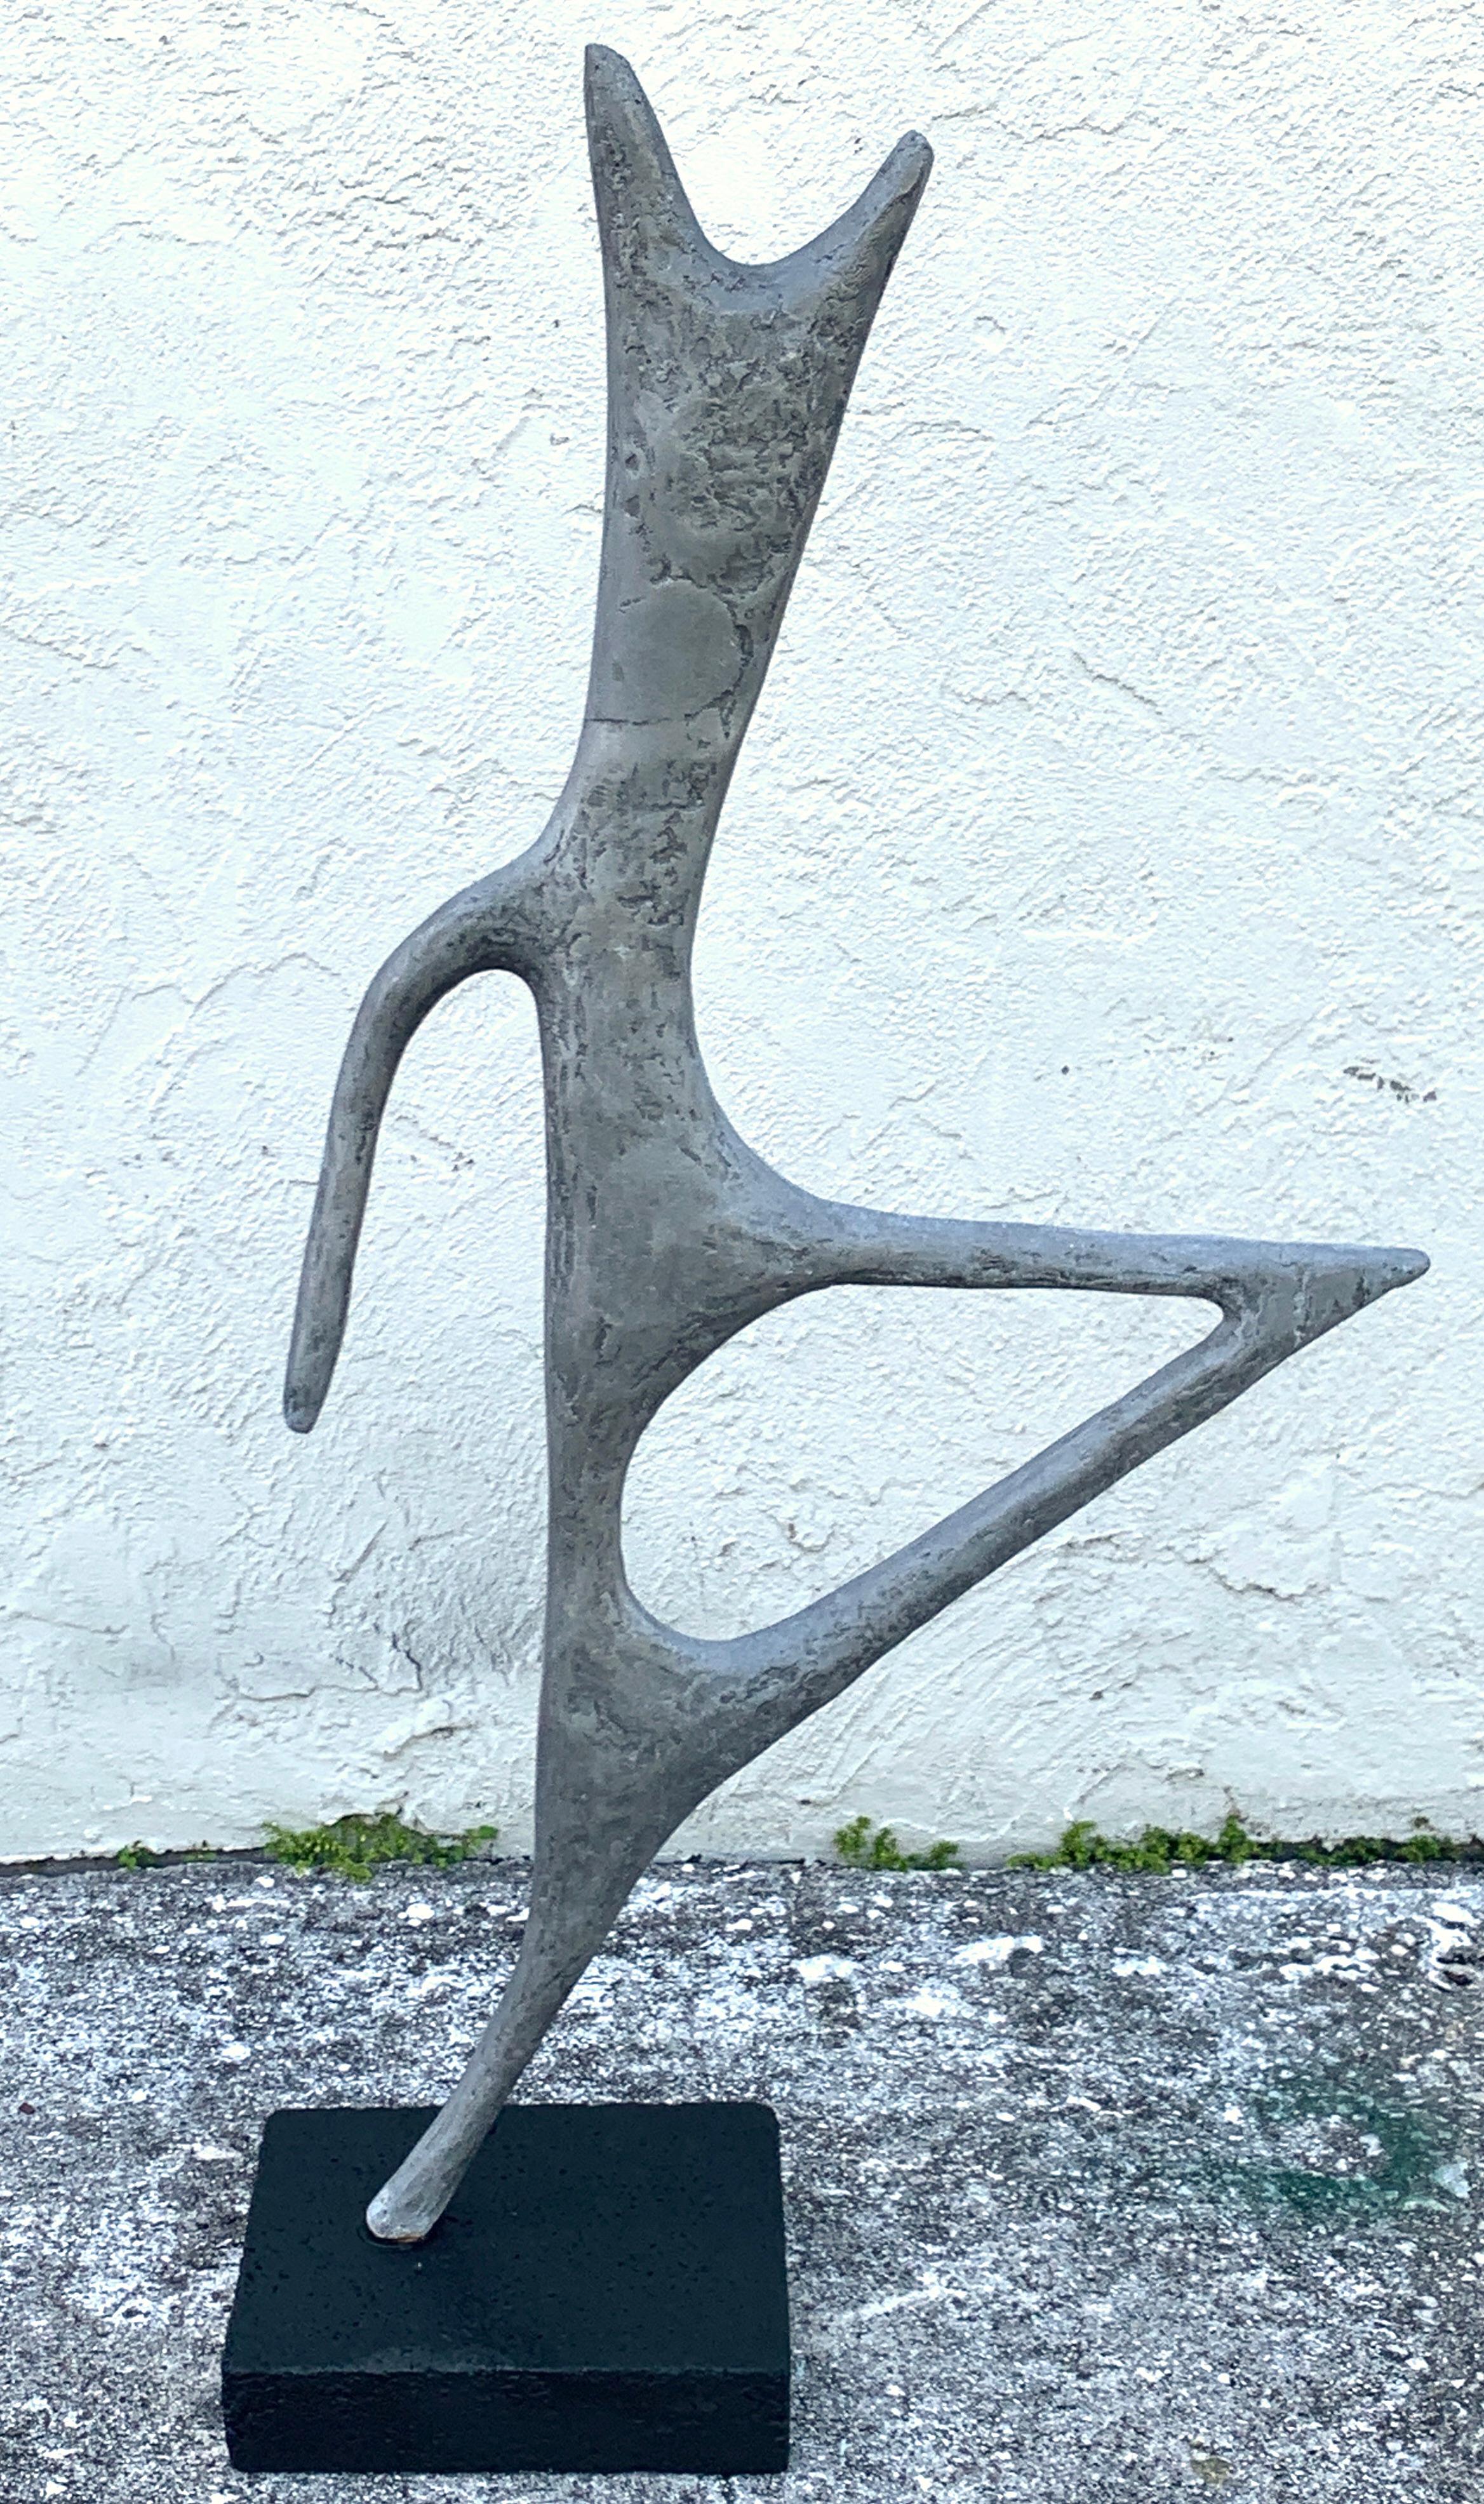 Large midcentury zinc abstract garden statue by JH Zimmerman. 1962, retaining the original patina, raised on a ebonized cast stone plinth base. The sculpture does not separate from the base. Can be used outdoors or indoors.
